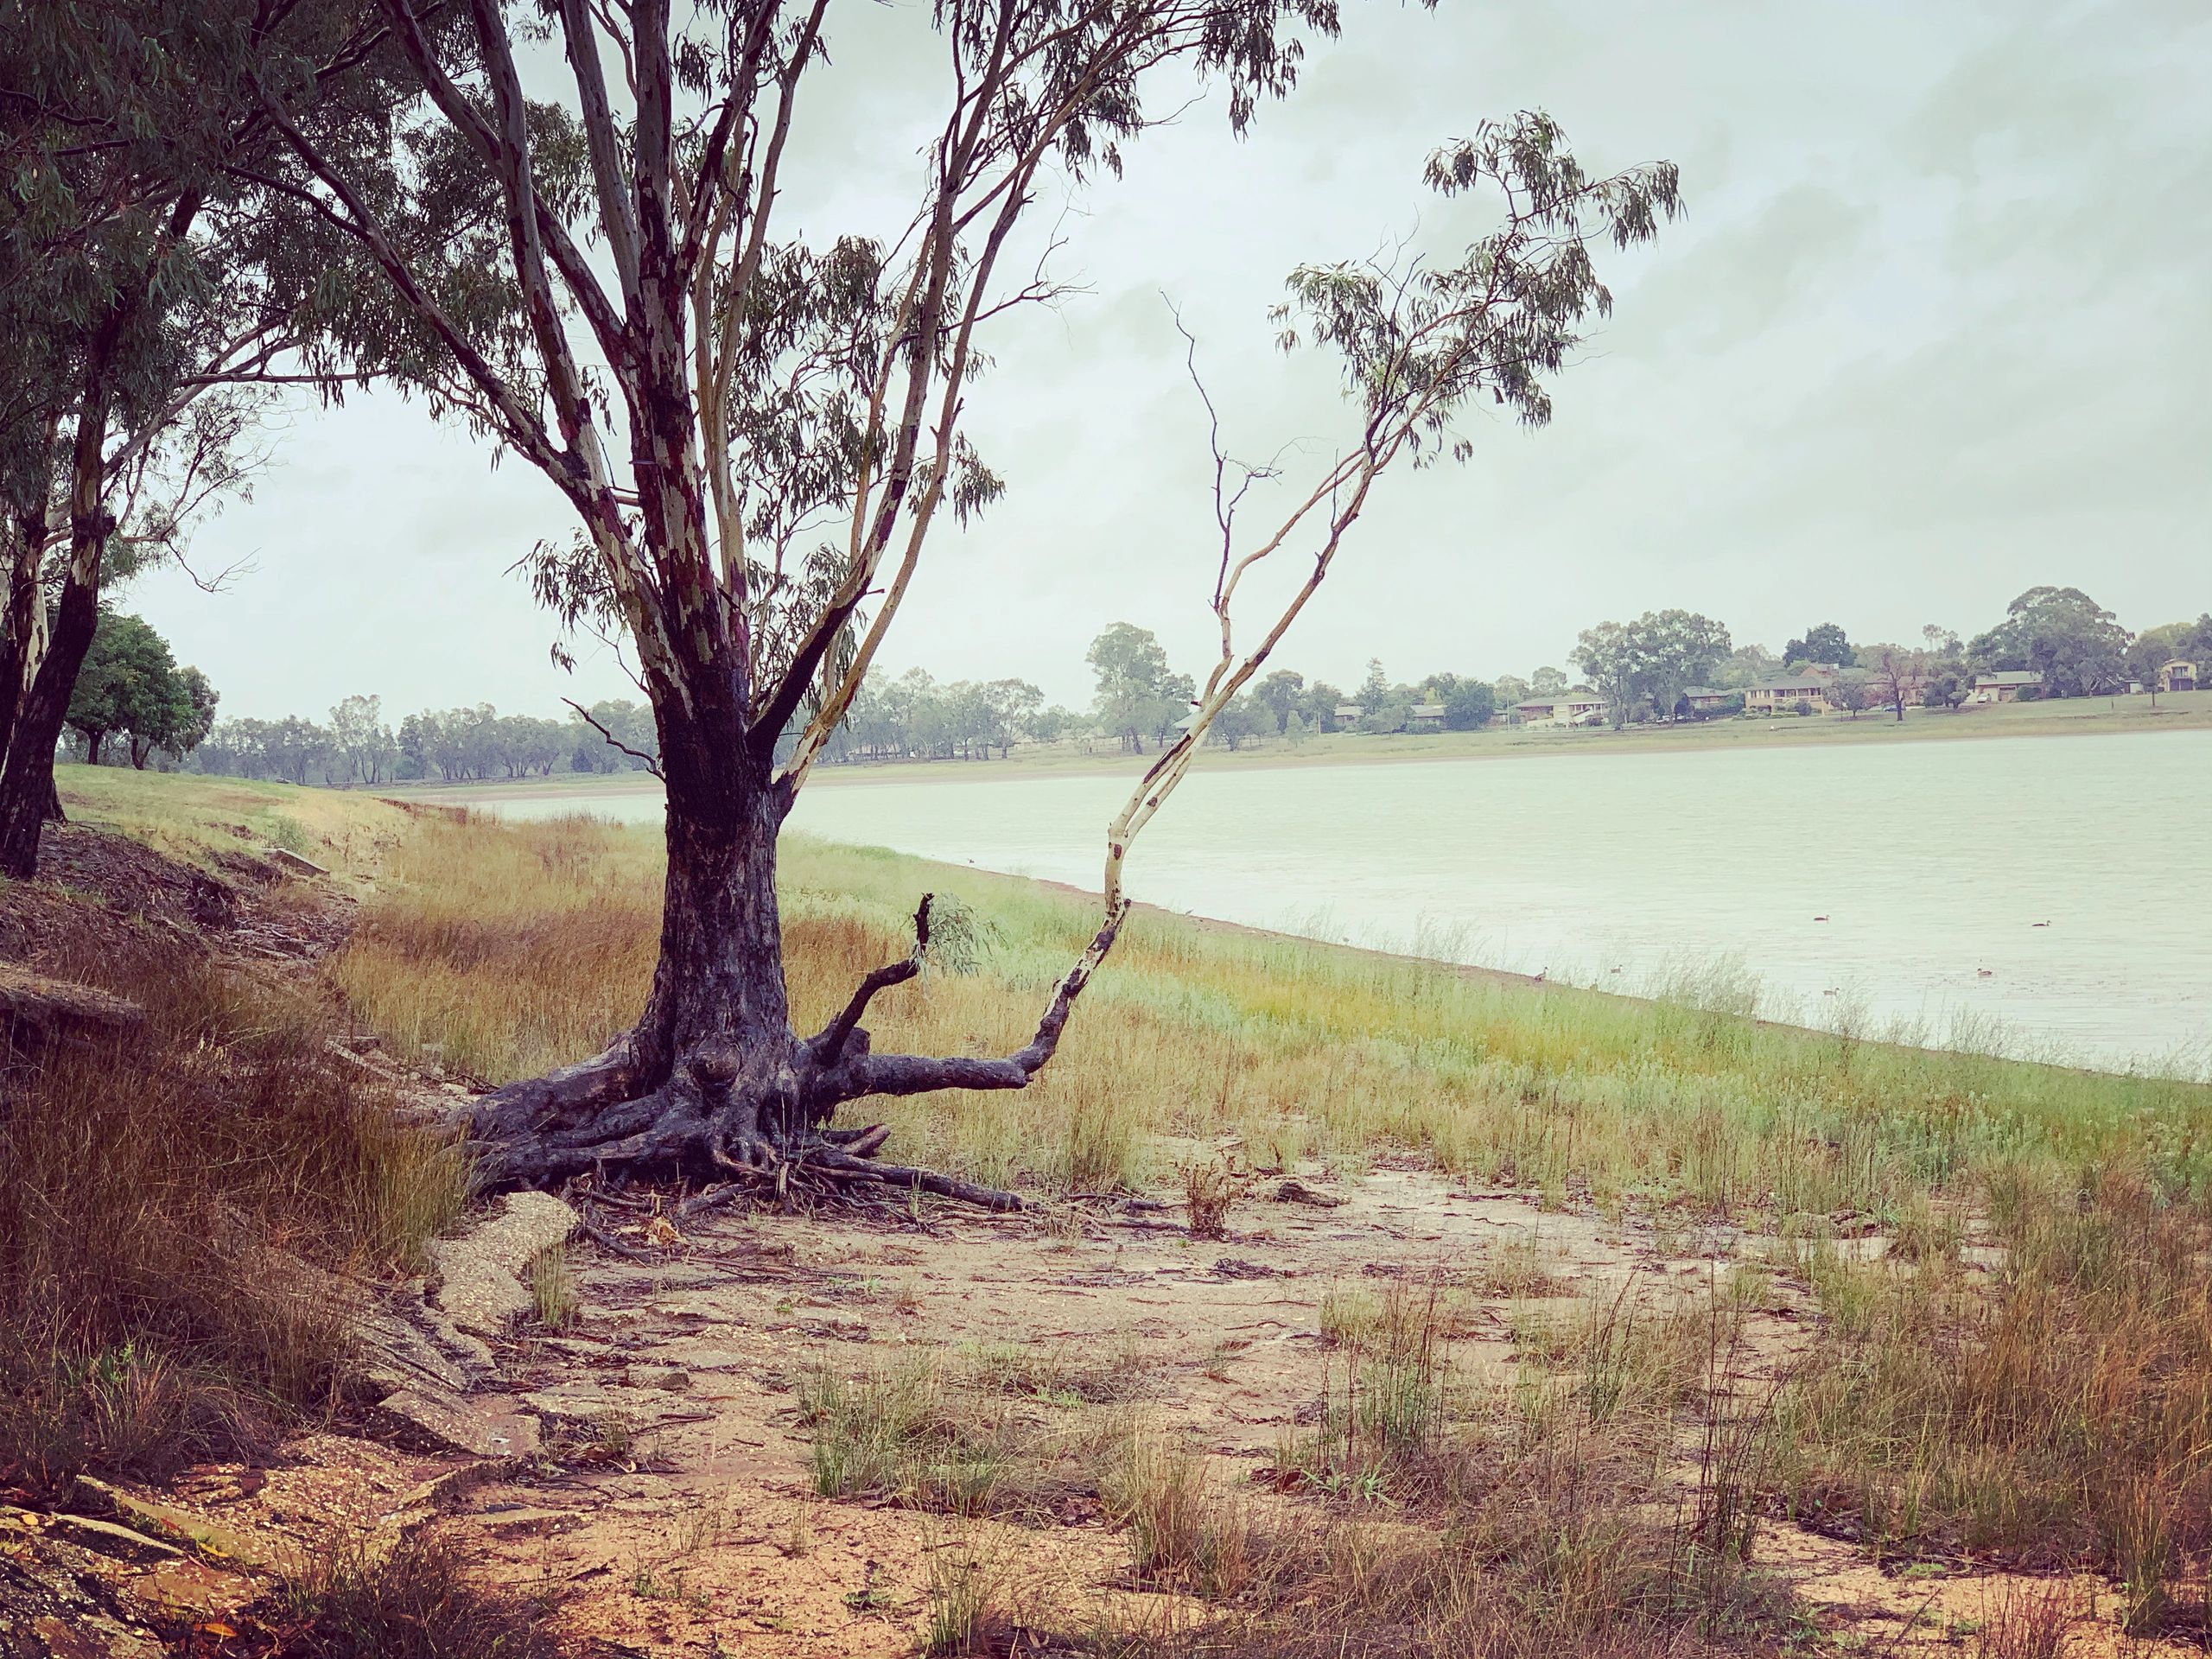 Lake Albert, Wagga Wagga.
When the water was very low, March 2020